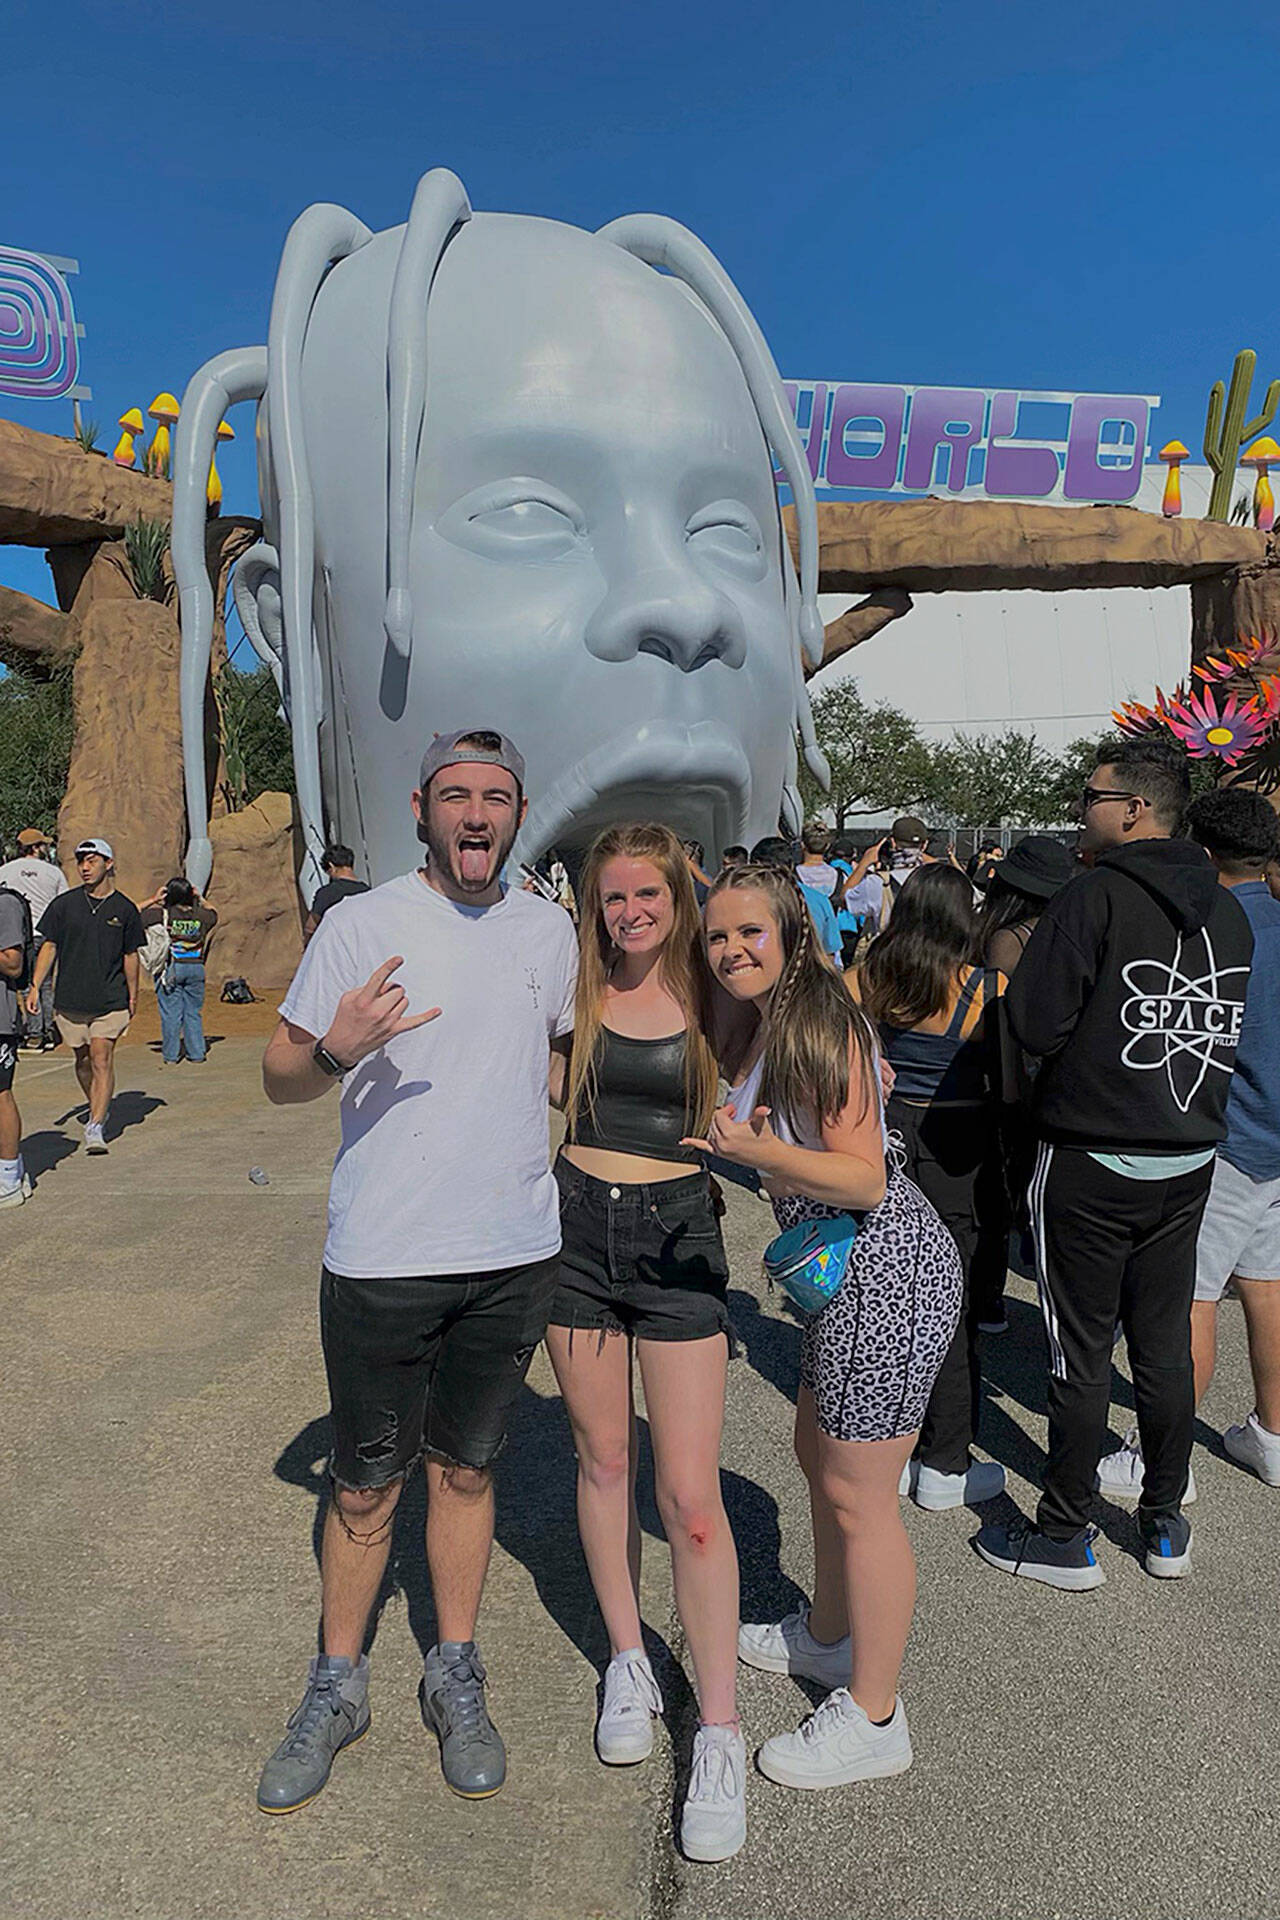 Sequim friends Cody Bell, Sam Smith and Natalie Thurston pose for a photo on the first day of Astroworld in Houston, Texas on Nov. 12. The trio would see multiple people be injured during the festival, which has 10 confirmed deaths as of Nov. 16. Photo courtesy of Sam Smith